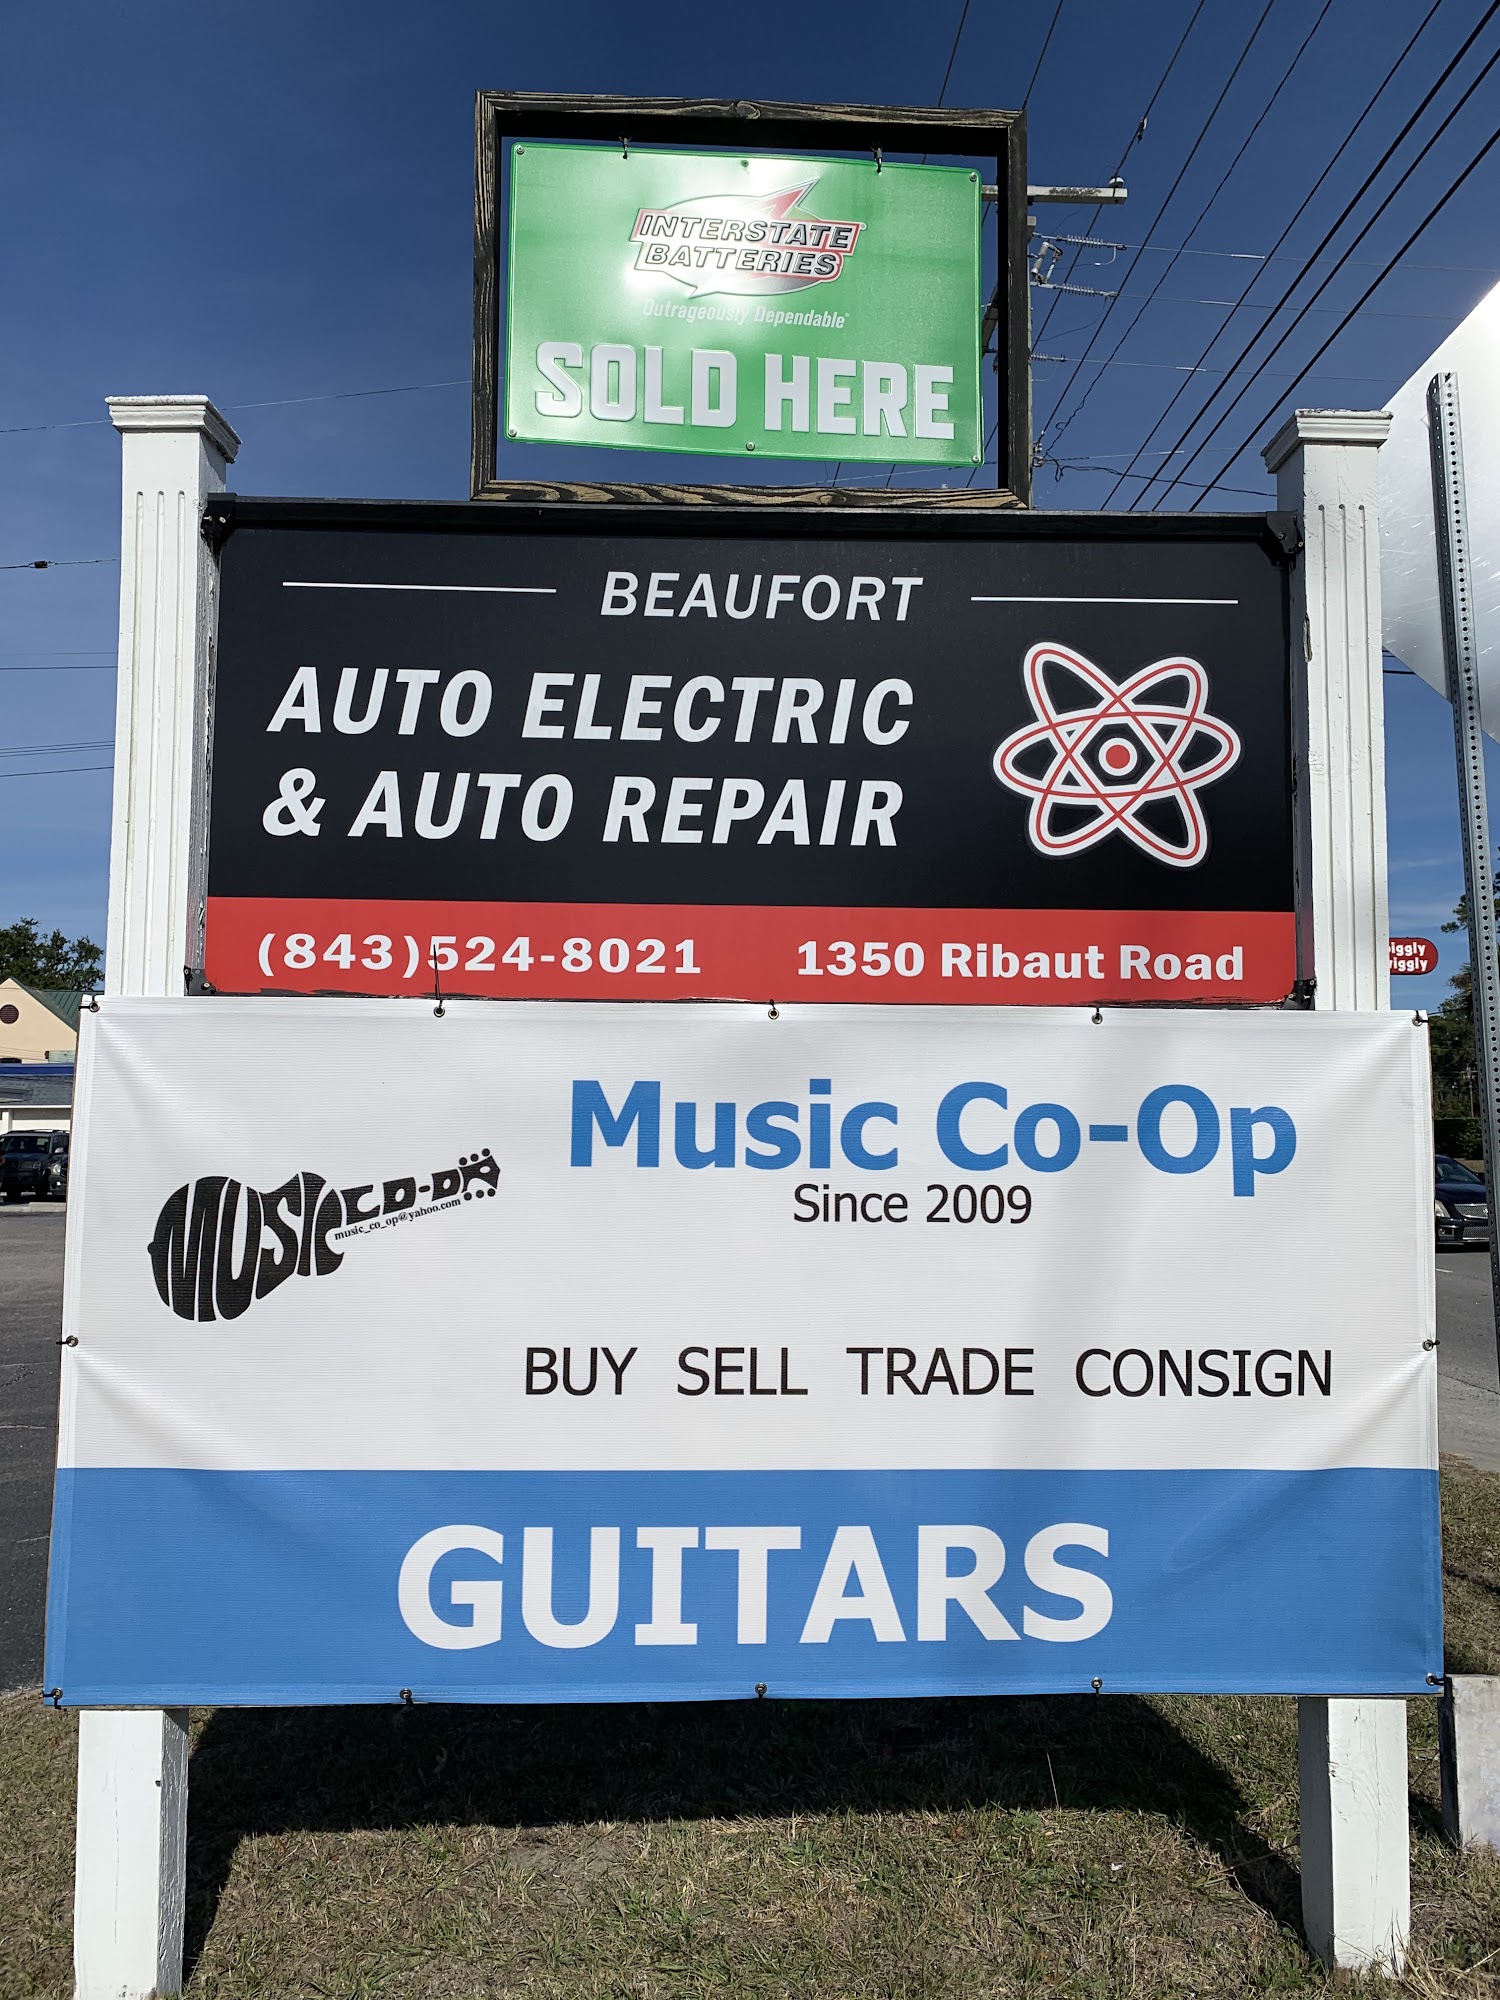 Beaufort Auto Electric and Auto Repair